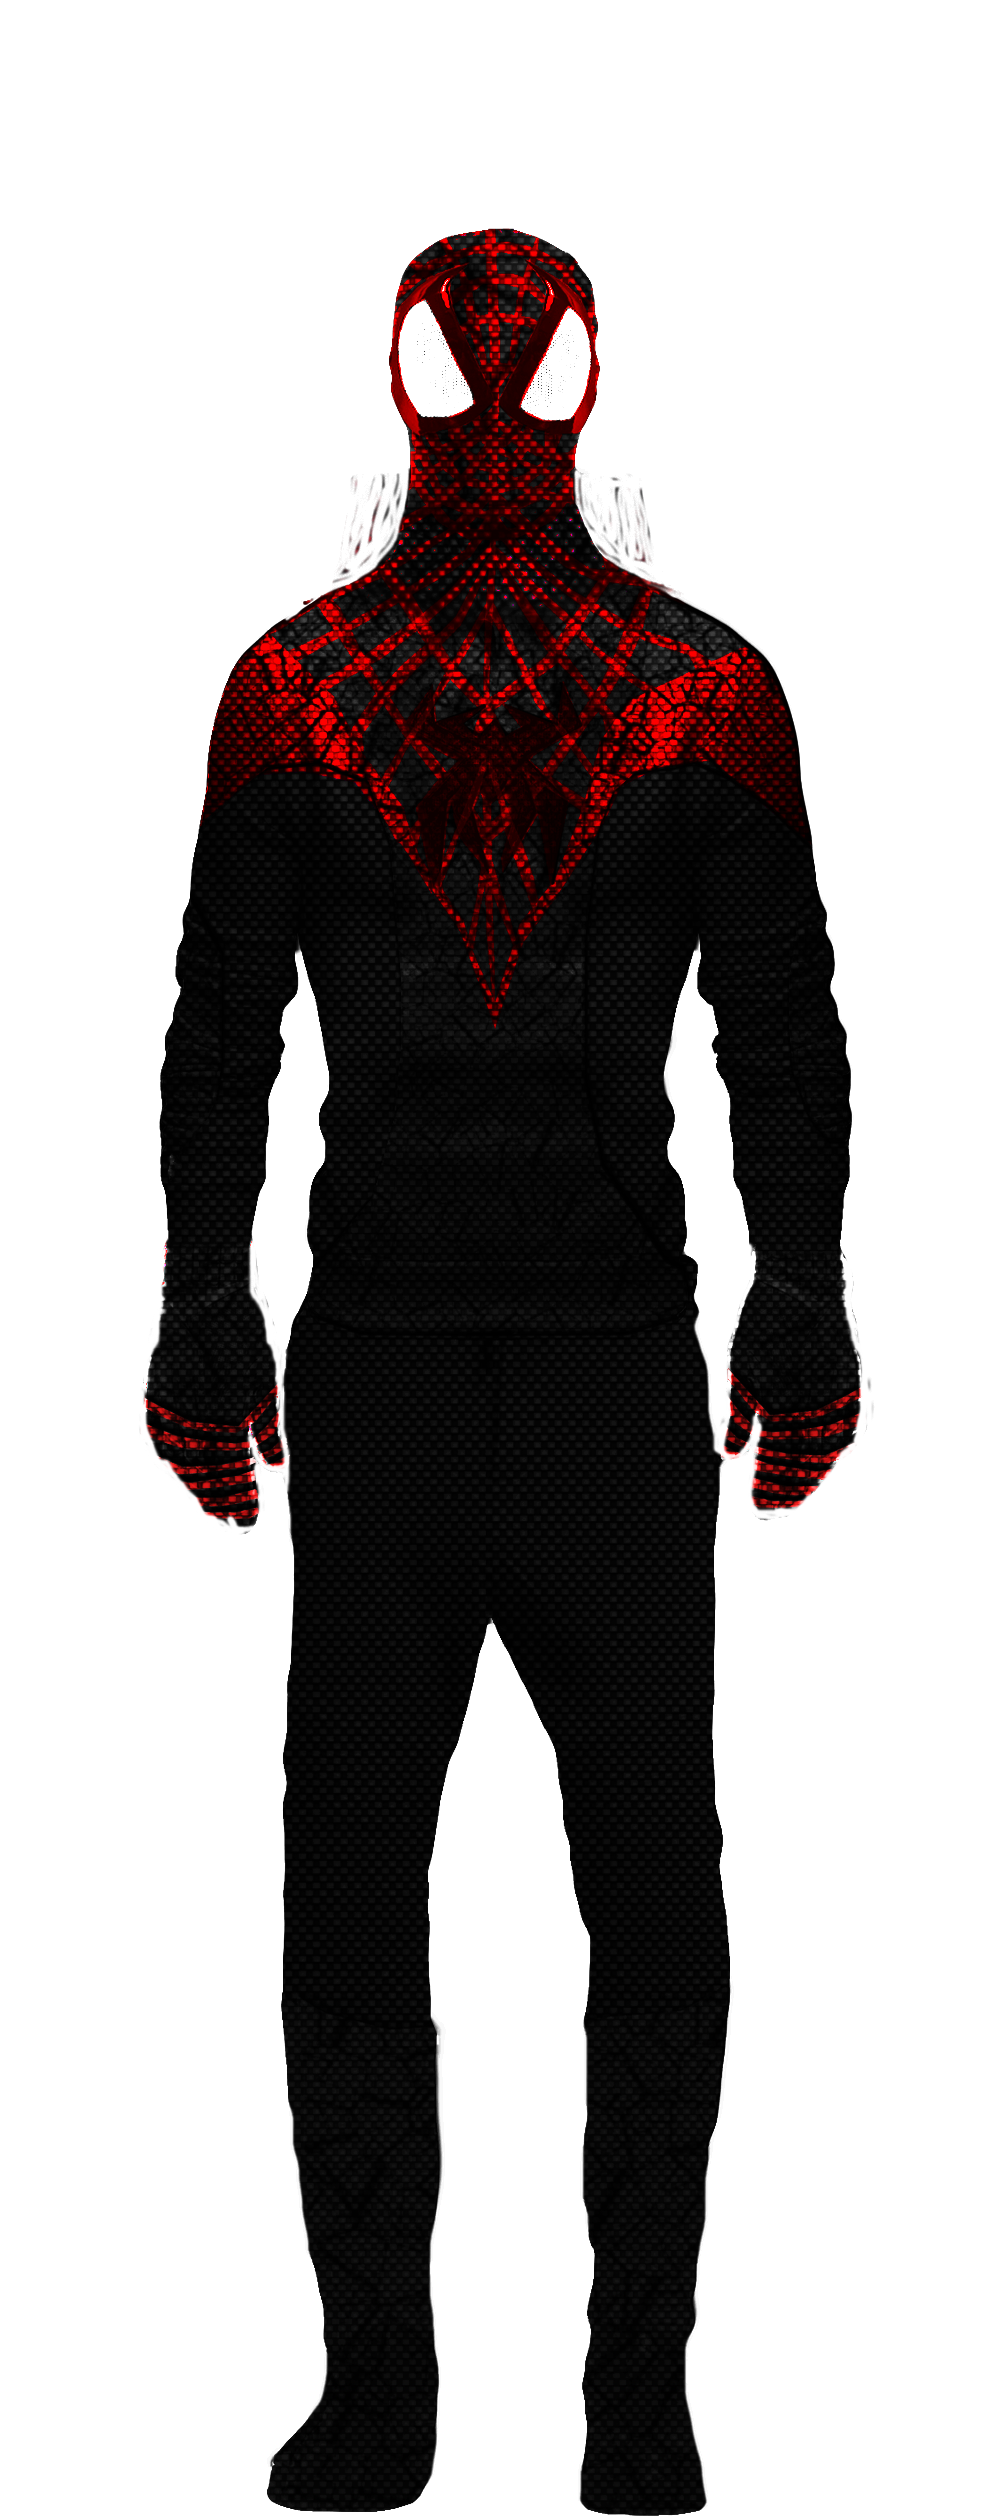 Miles Morales Spider Man Concept By Cthebeast123 On Deviantart